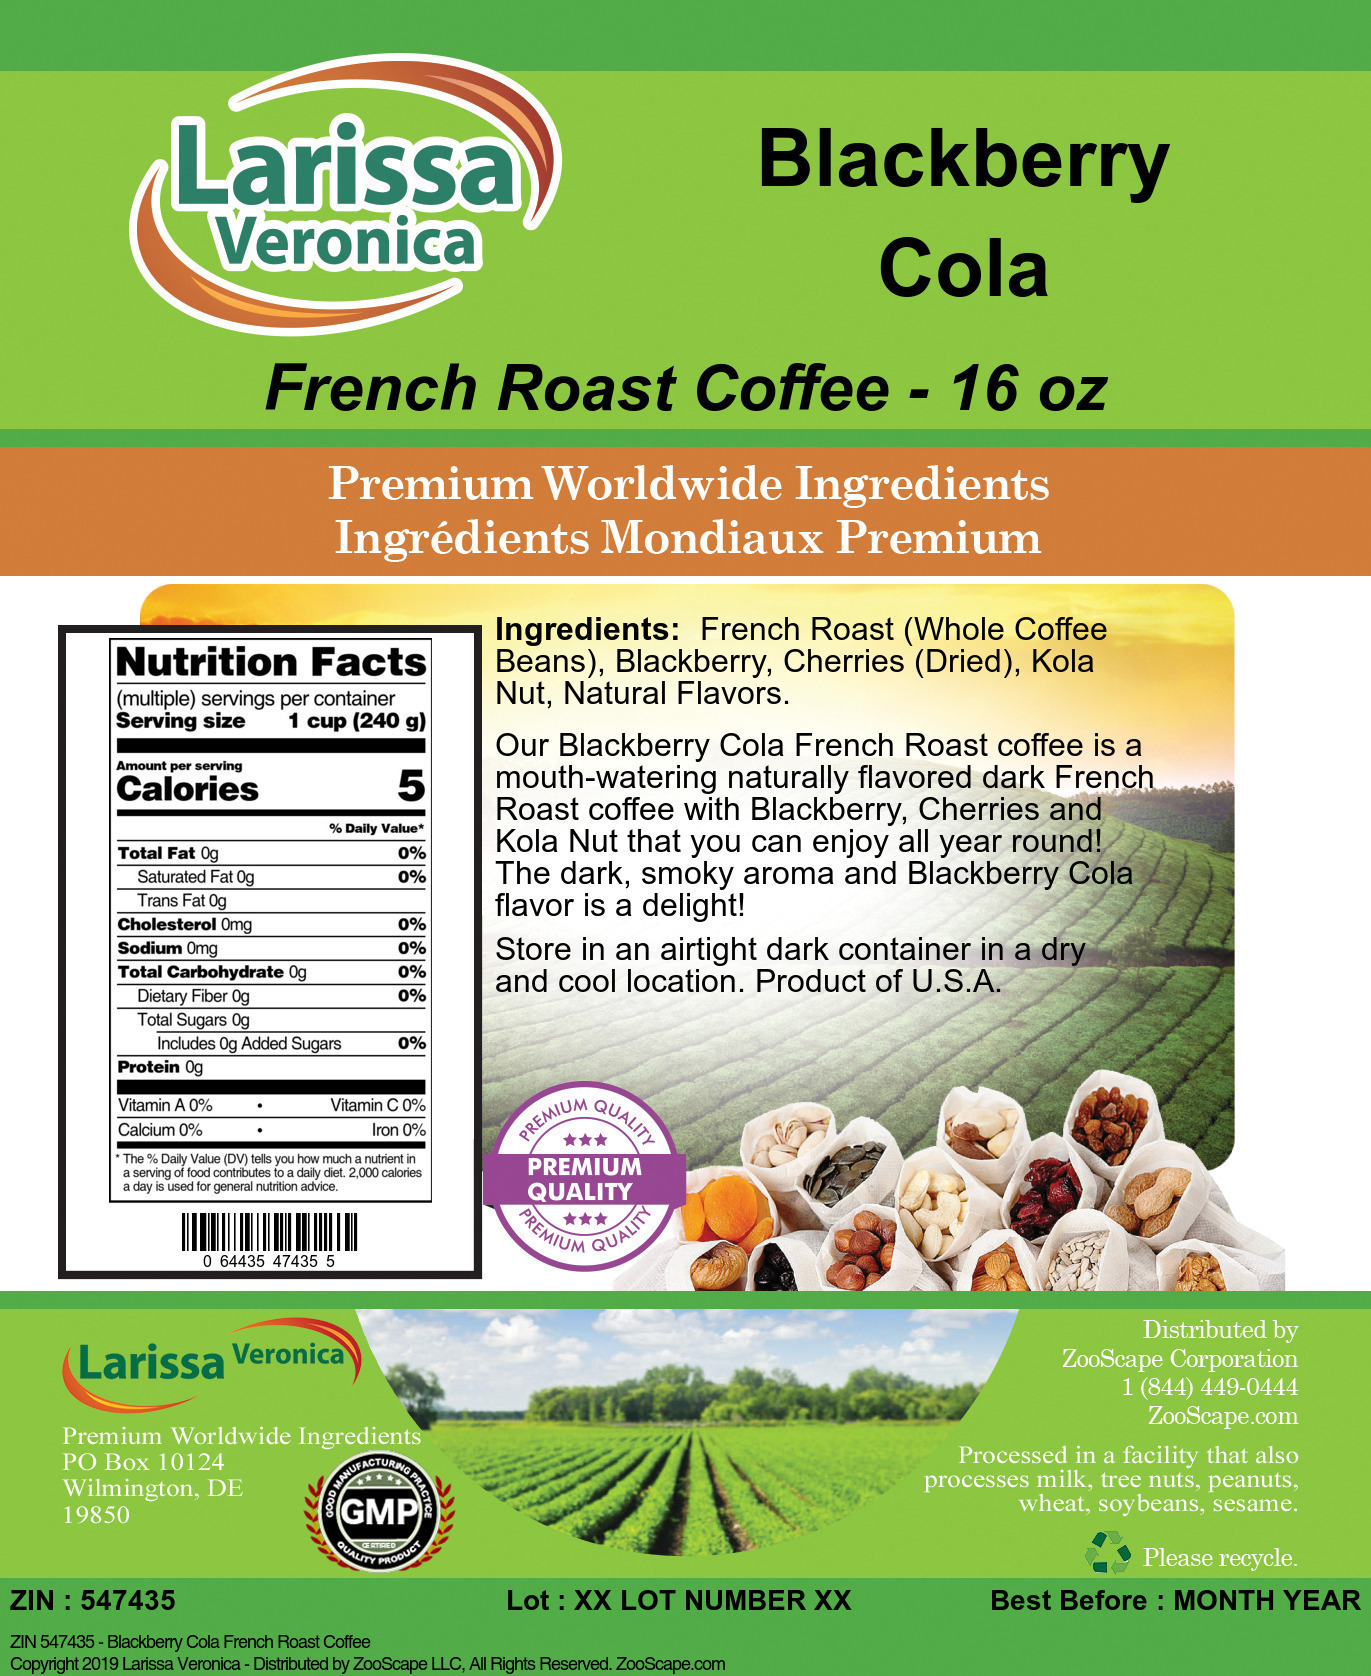 Blackberry Cola French Roast Coffee - Label